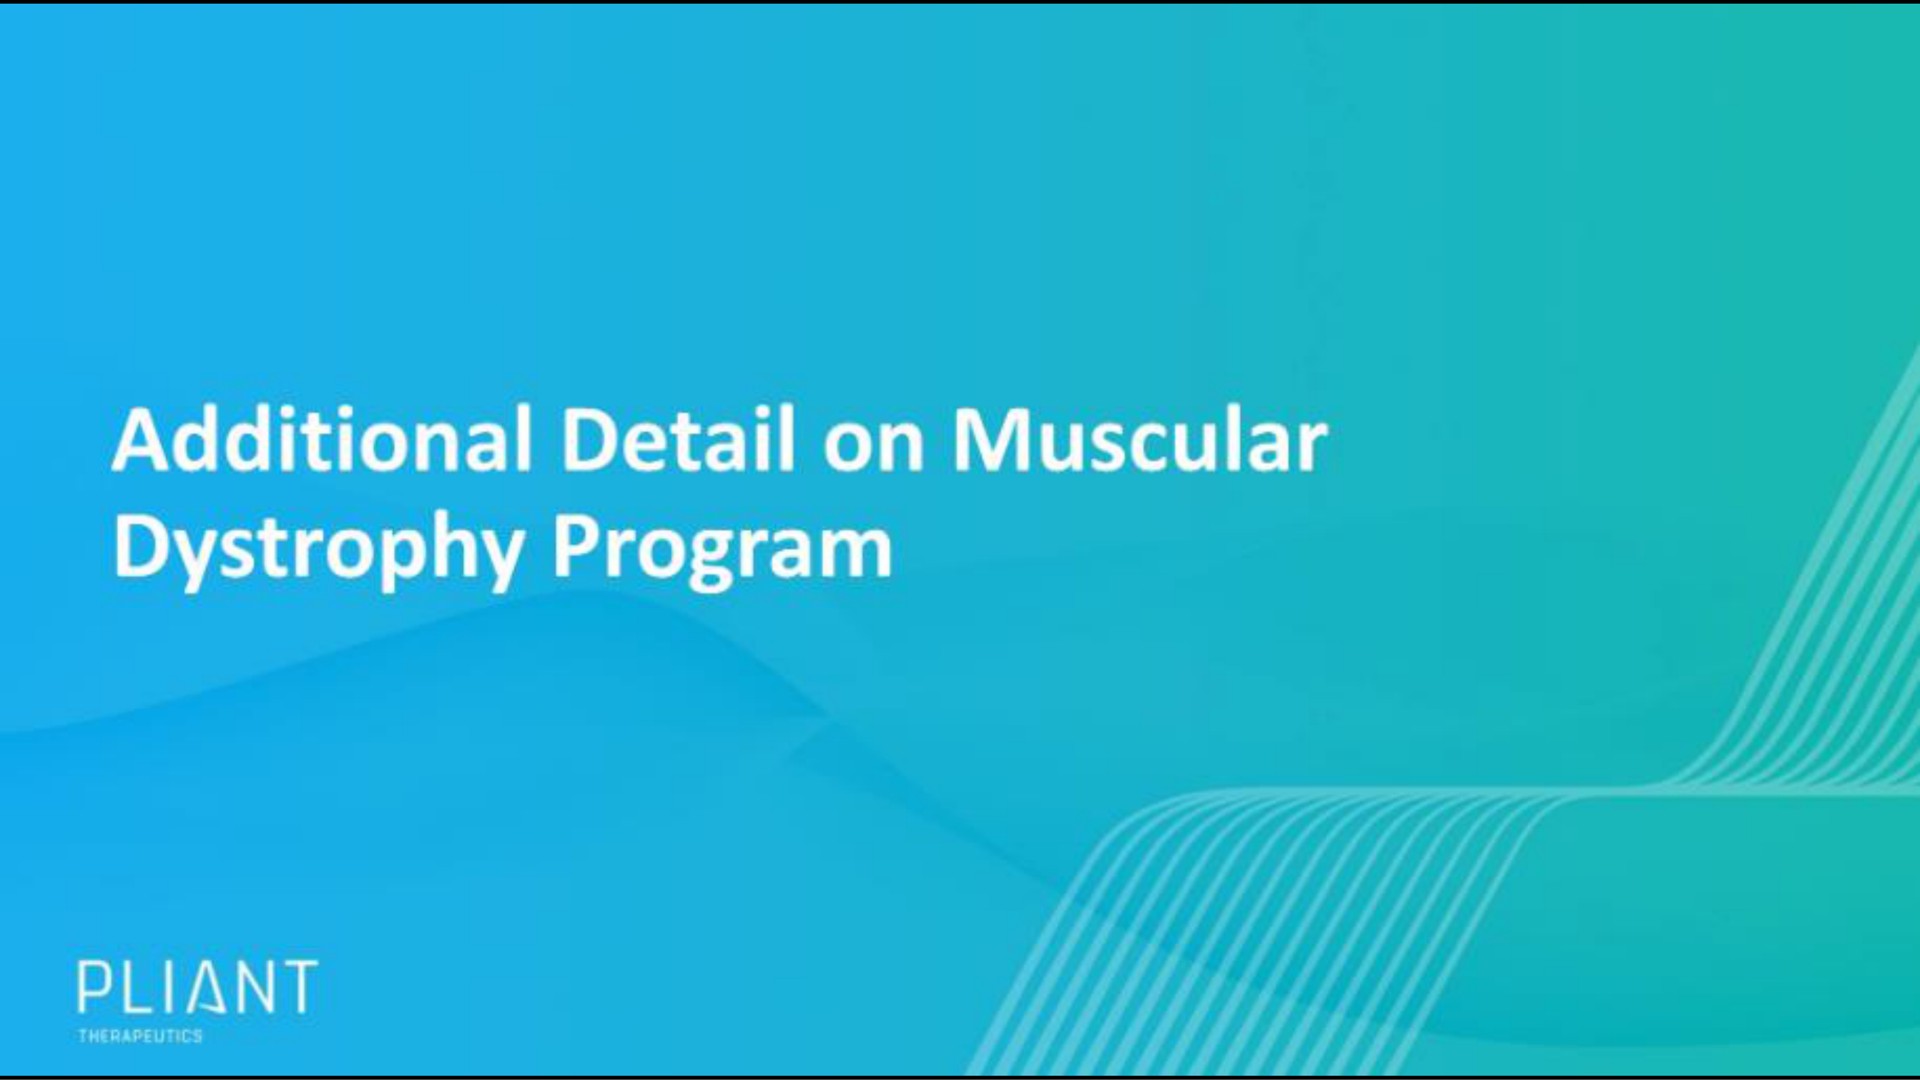 additional detail on muscular dystrophy program | Pilant Therapeutics